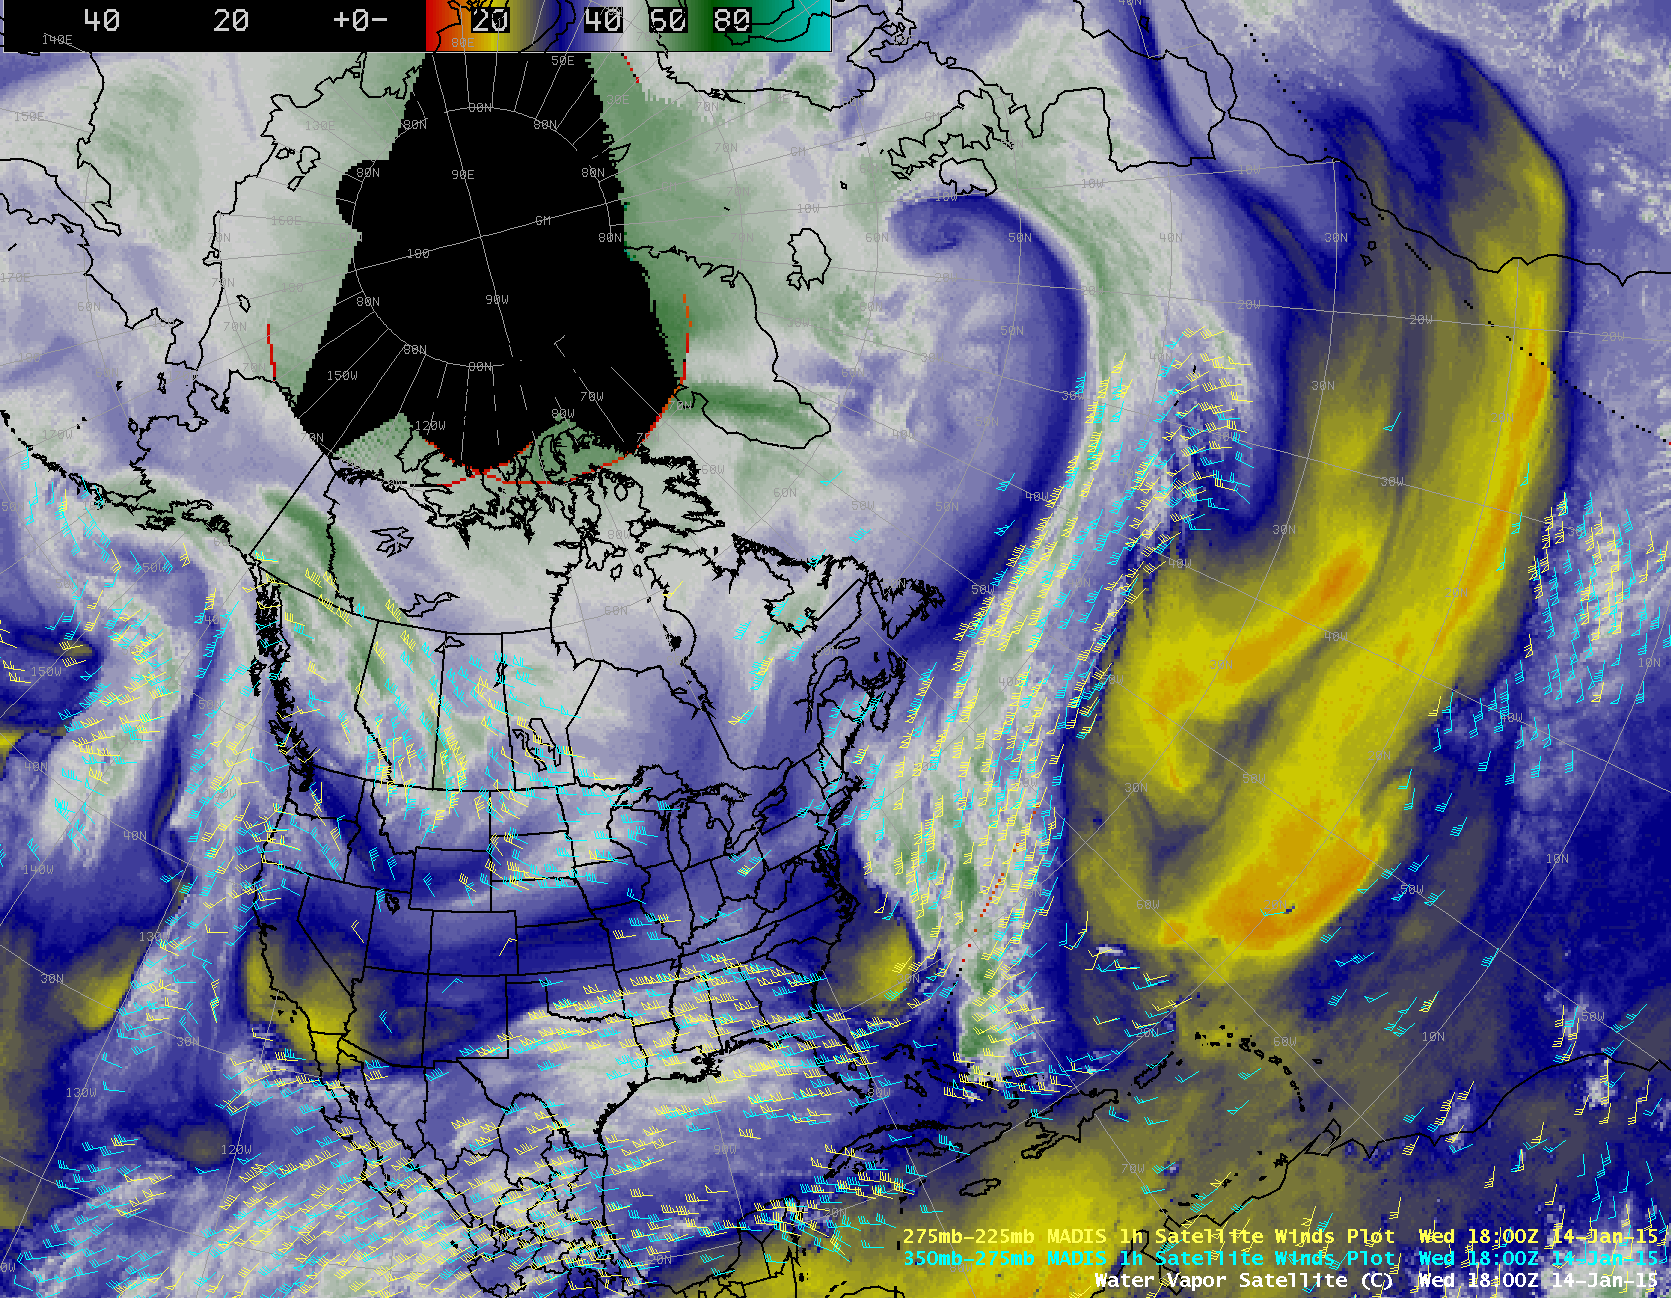 Water vapor images with MADIS atmospheric motion vectors (click to play animation)